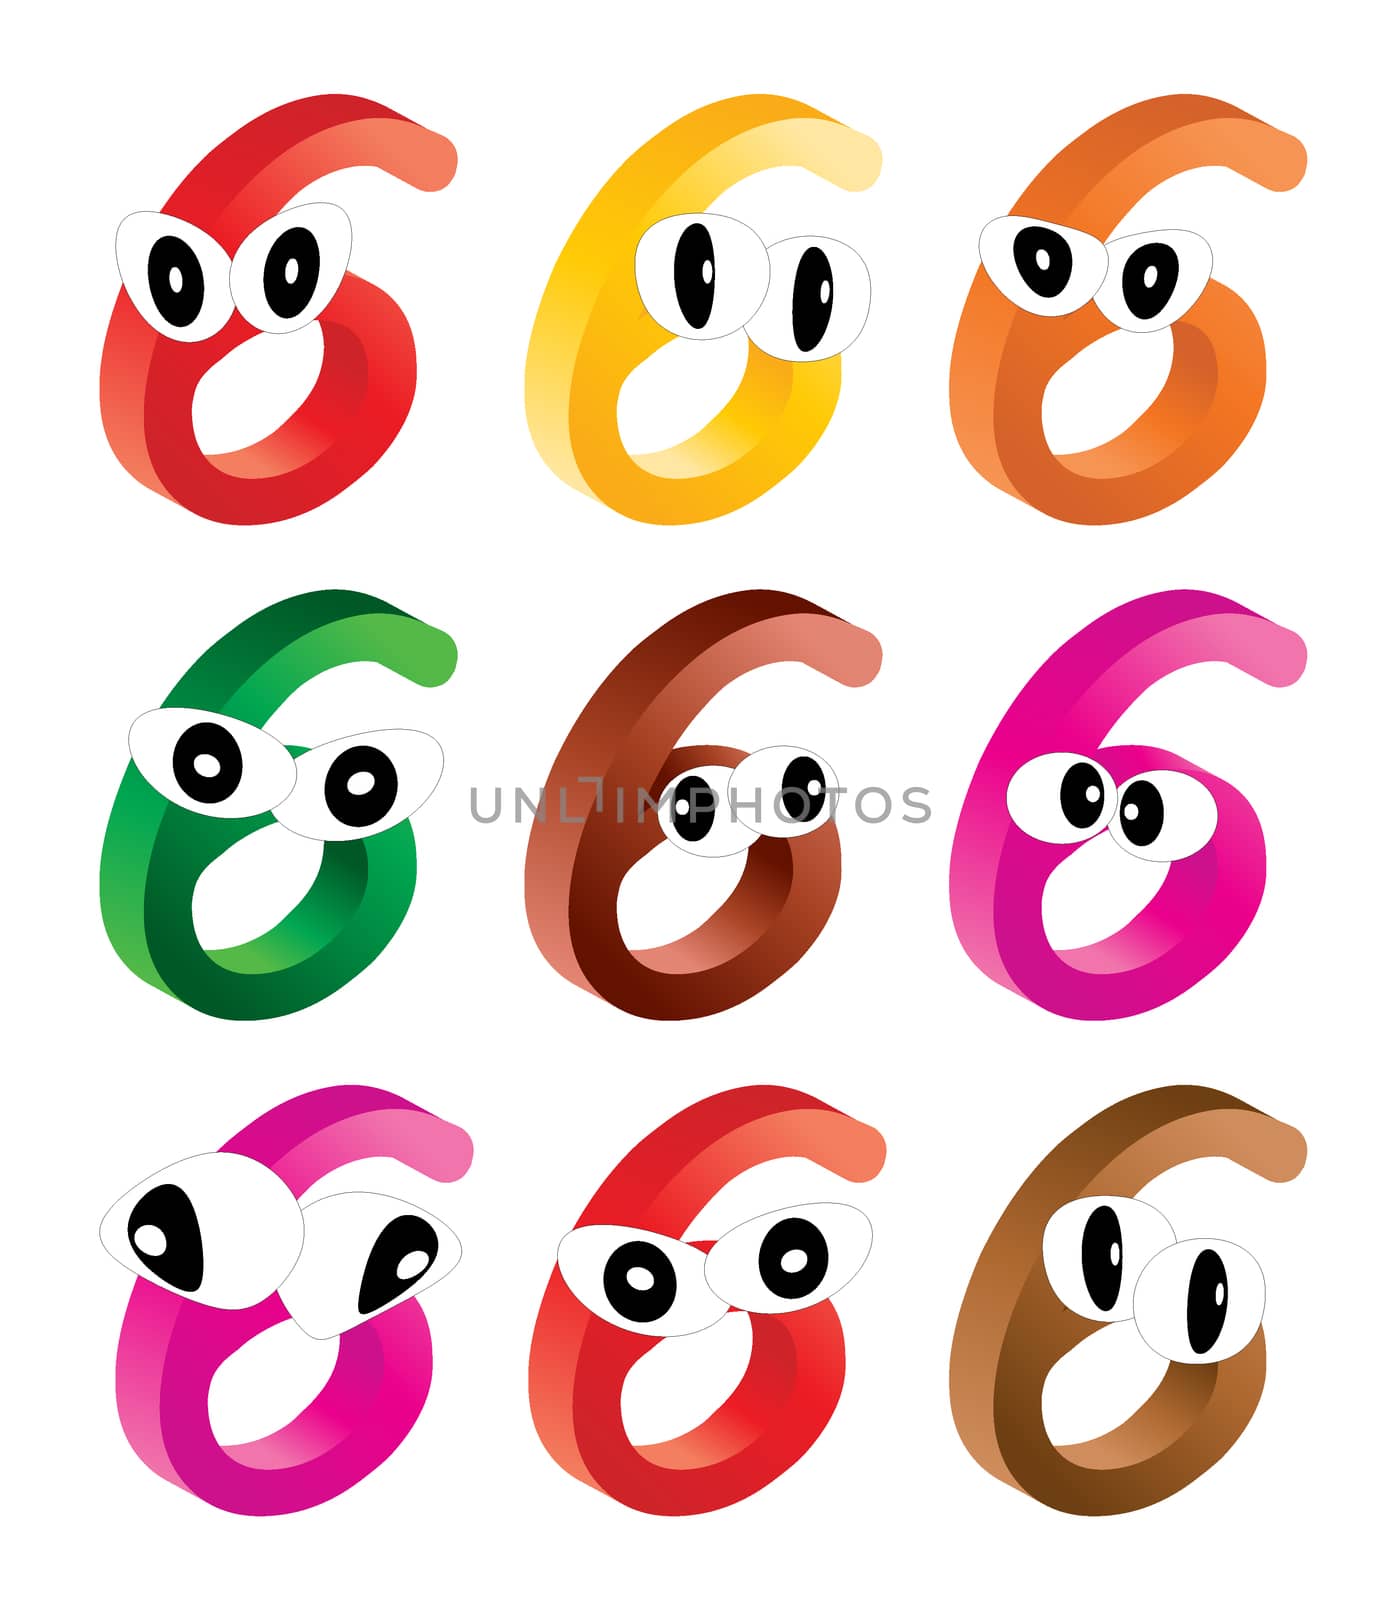 Image of cartoon number, digit six with eyes. Funny, cheerful and colorful illustration for children isolated on white background.